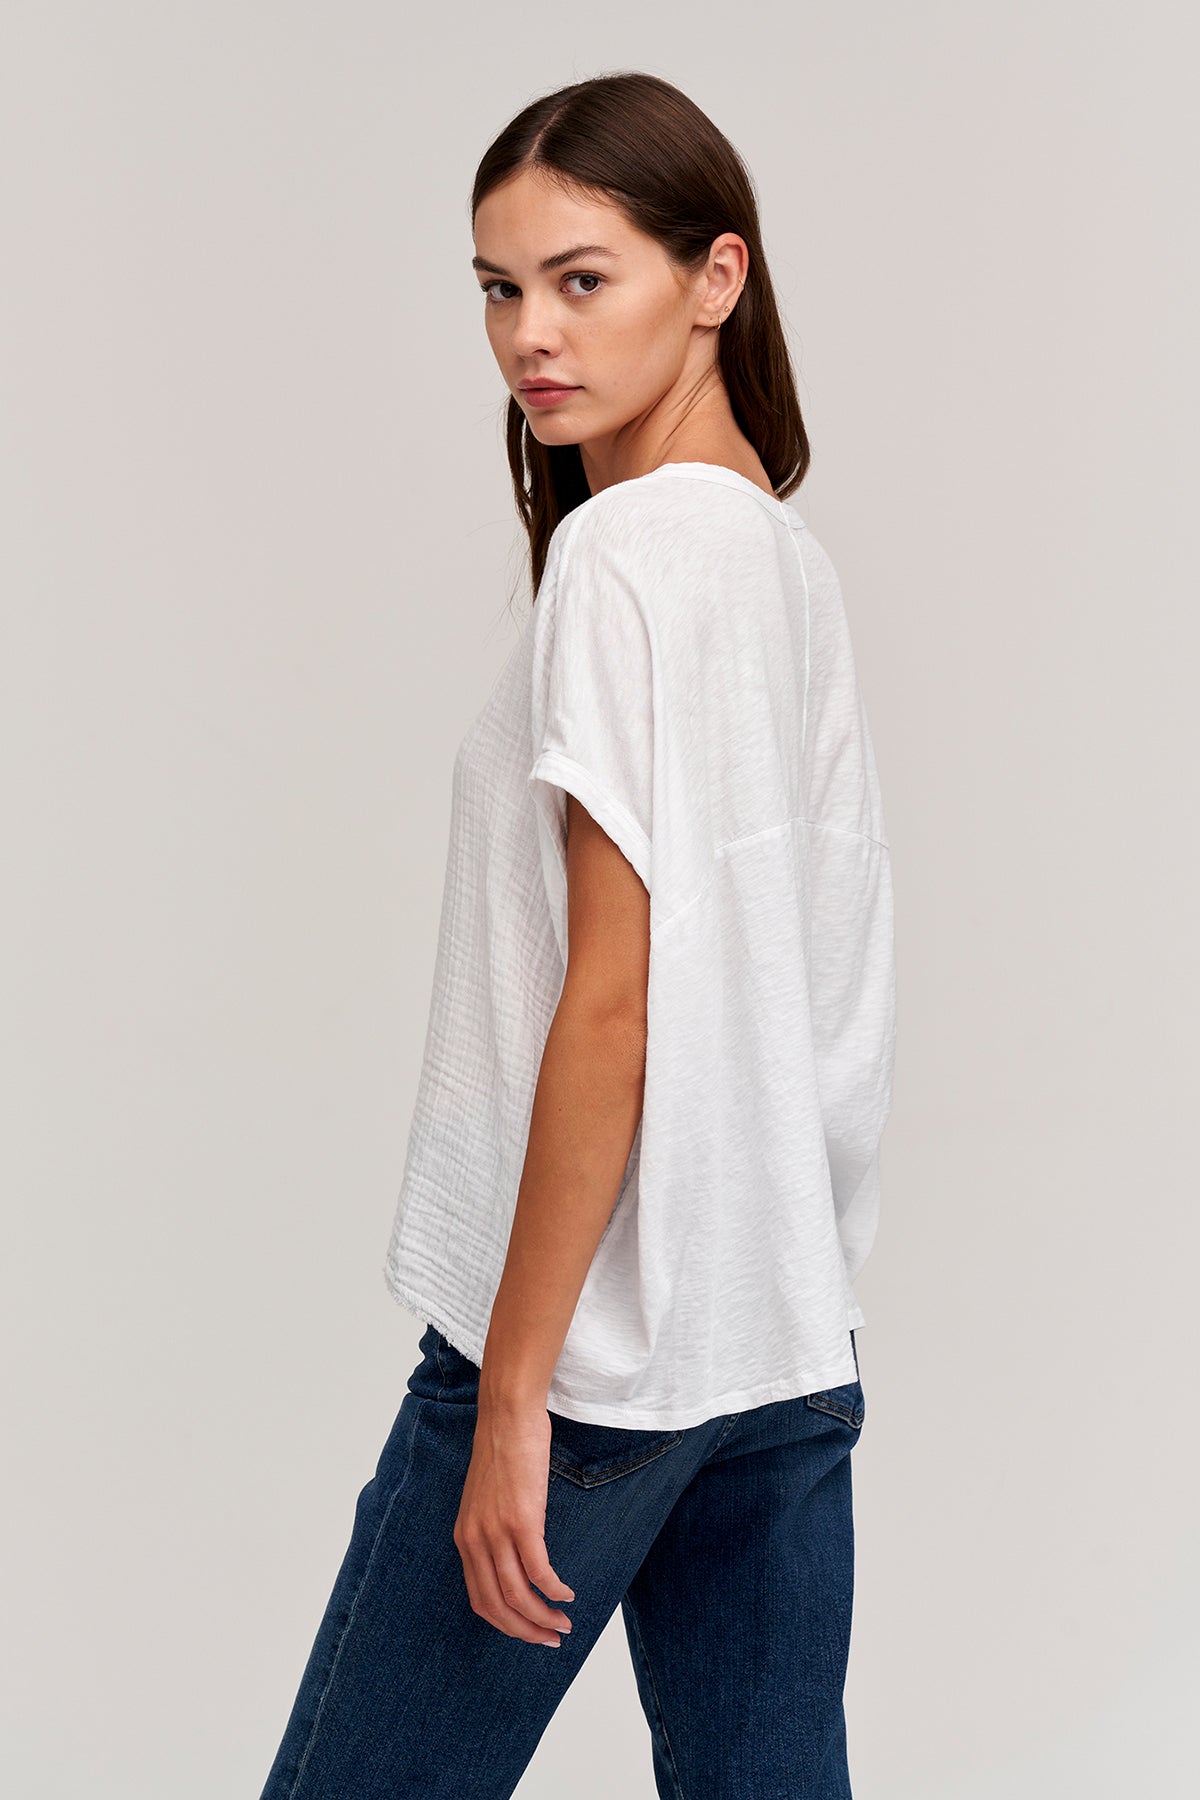   The model is wearing a white CORA BOXY TEE and jeans by Velvet by Graham & Spencer. 